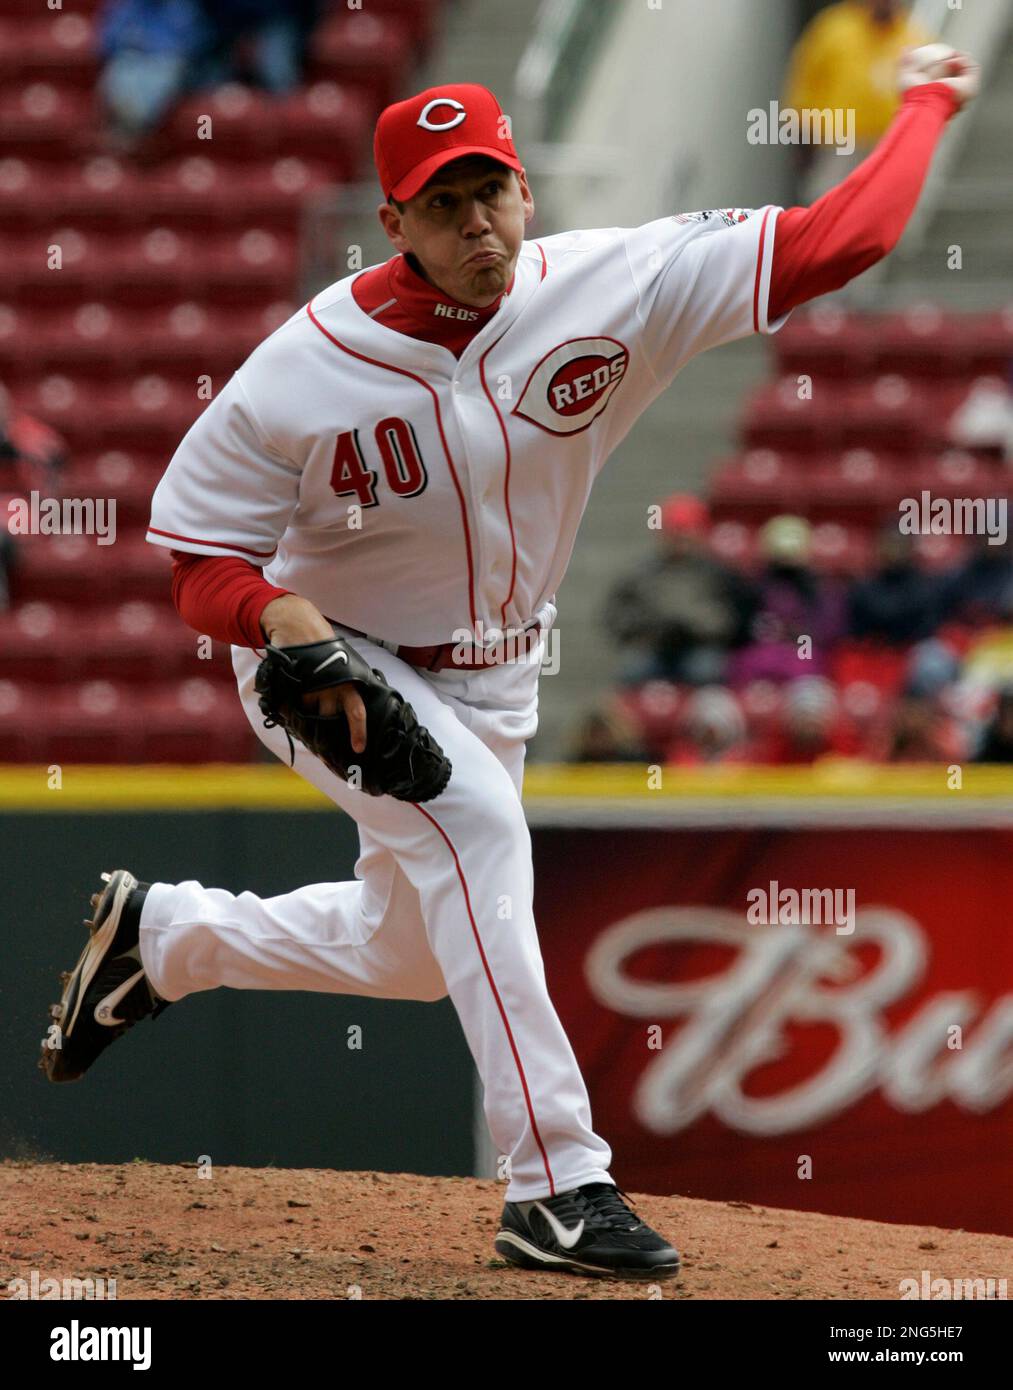 Cincinnati Reds reliever Jon Coutlangus pitches against the Houston Astros  in a baseball game, Thursday, May 10, 2007, in Cincinnati. (AP Photo/David  Kohl Stock Photo - Alamy